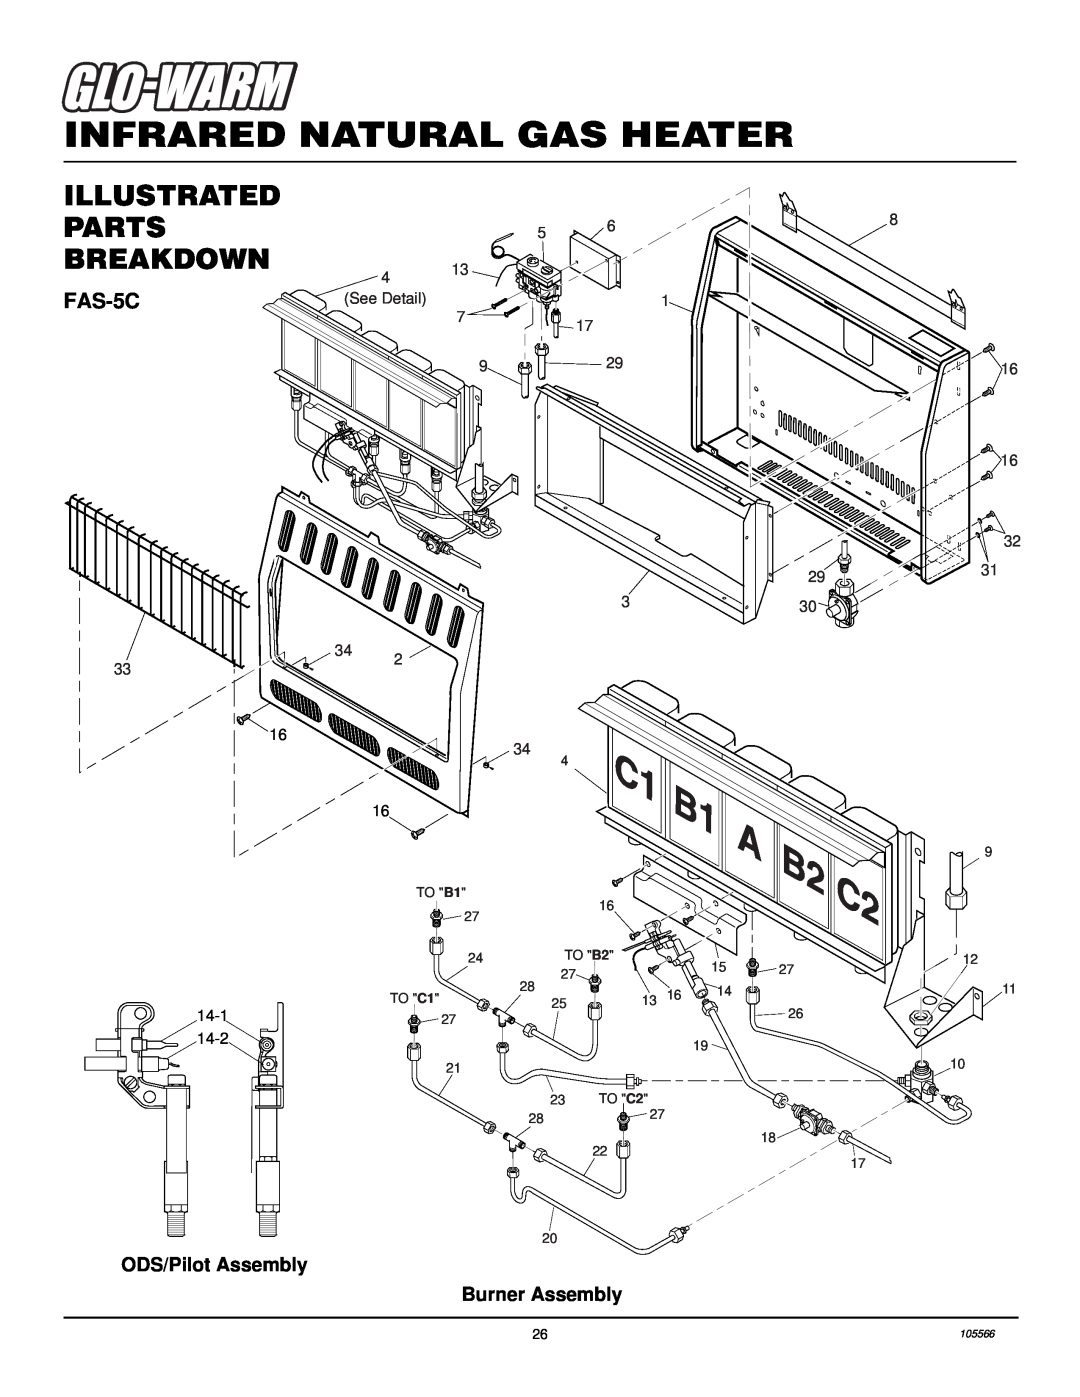 Desa FAS-3C, FA-5B FAS-5C, Infrared Natural Gas Heater, Illustrated Parts Breakdown, ODS/Pilot Assembly, Burner Assembly 